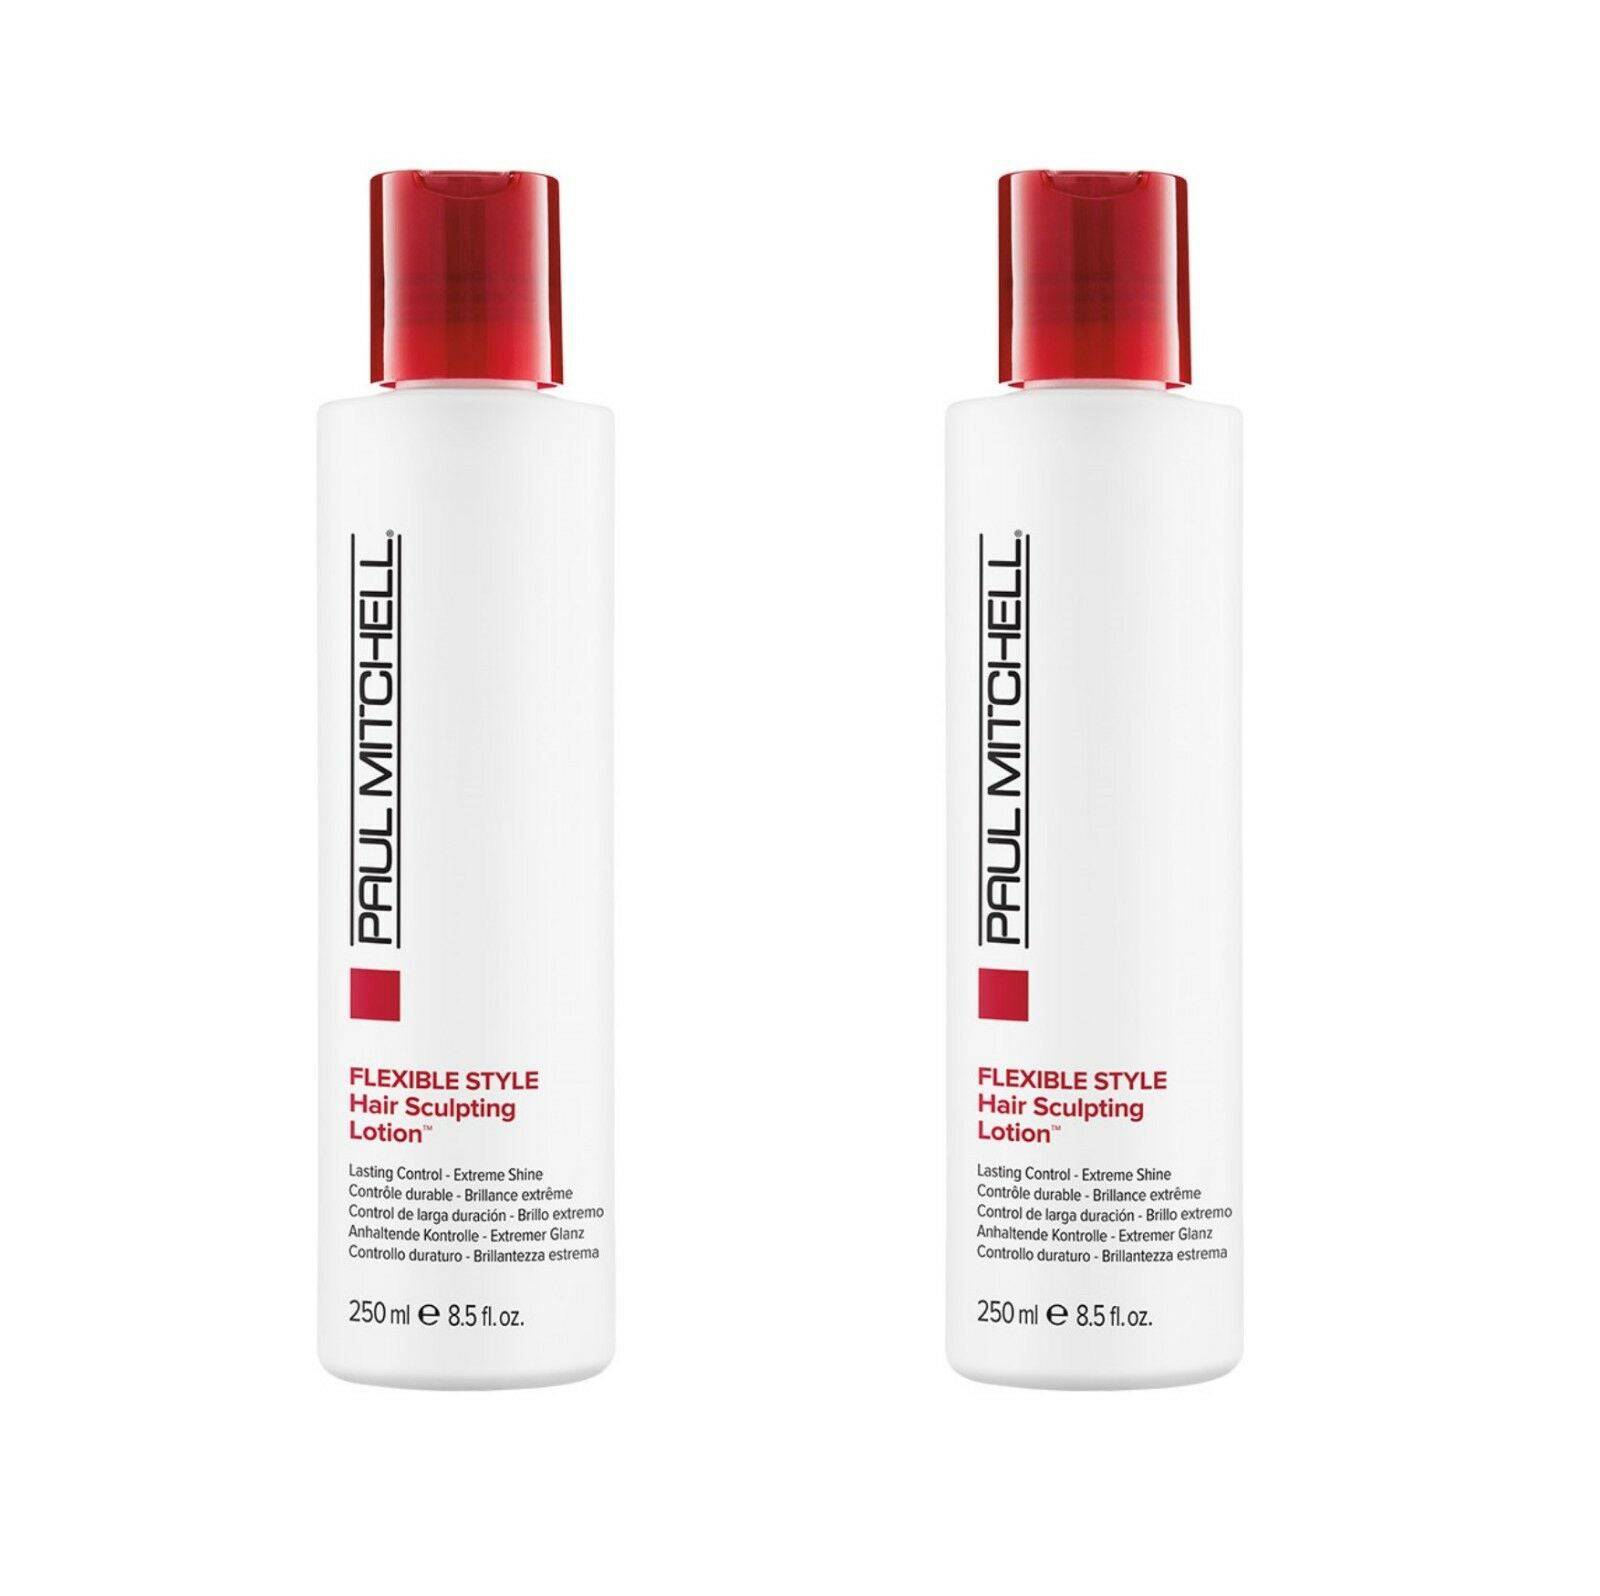 Paul Mitchell Hair Sculpting Lotion Lasting Control 250ml x 2 - On Line Hair Depot